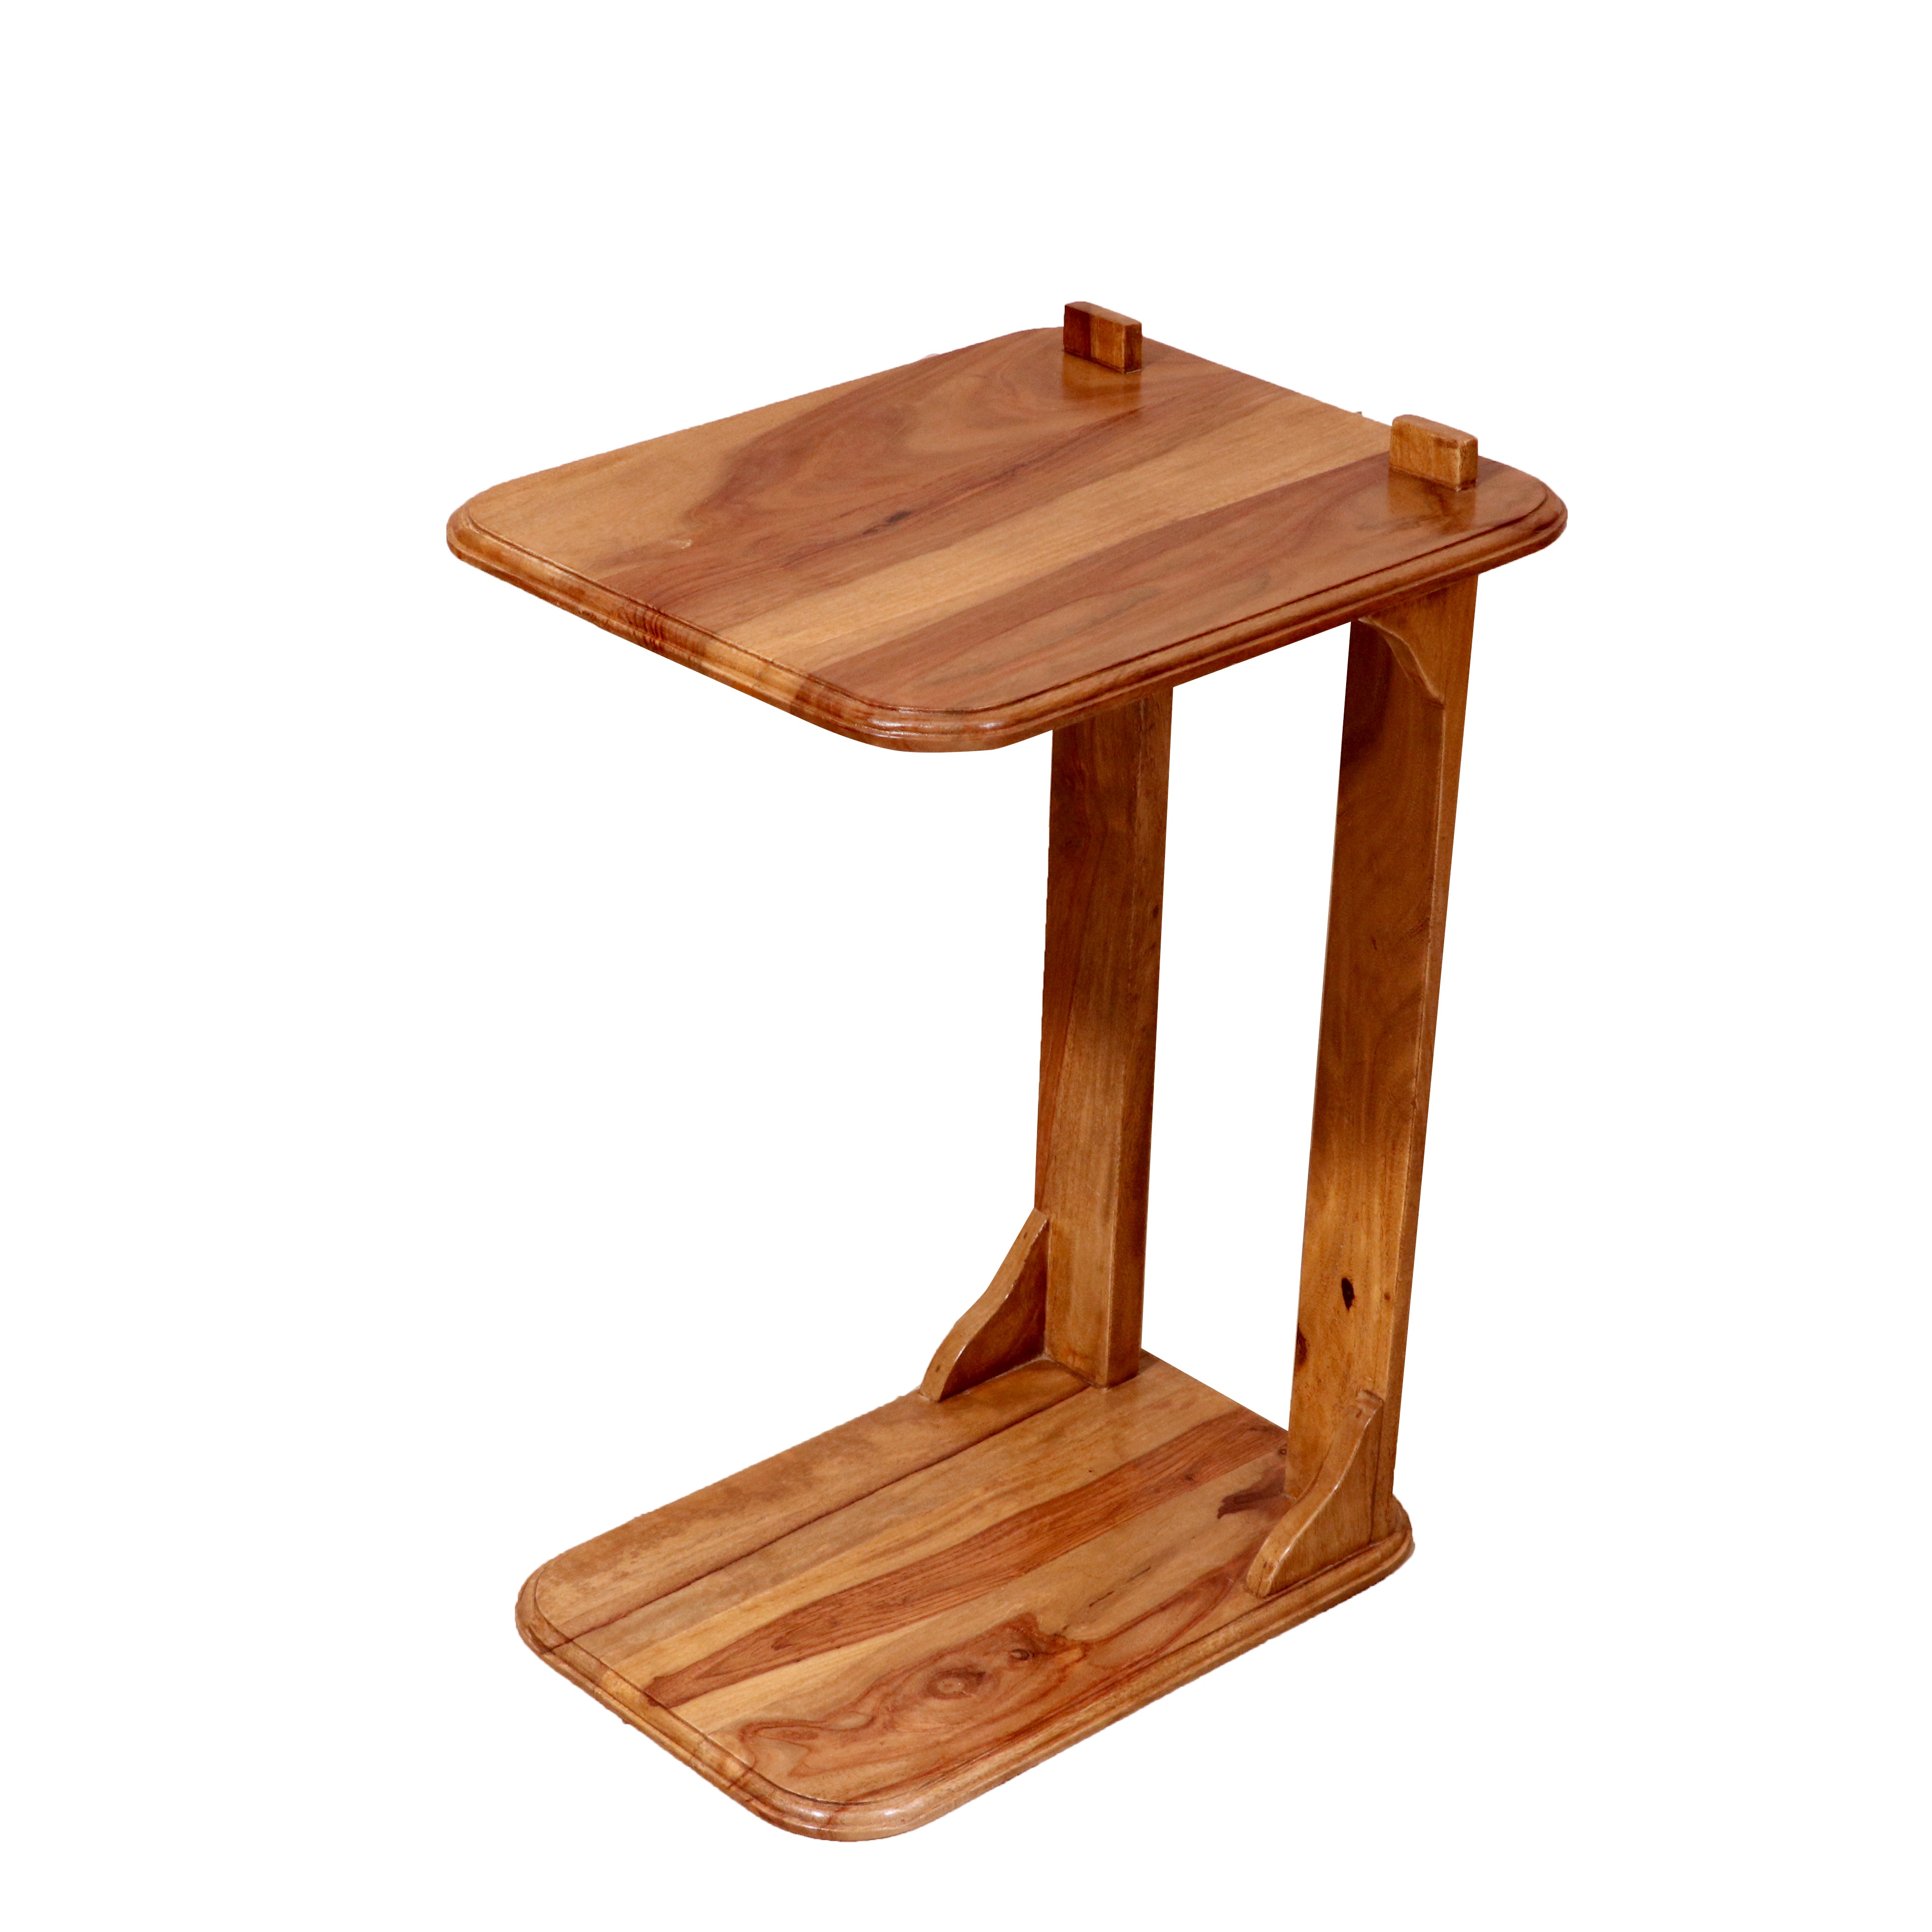 Wooden C Table C Table